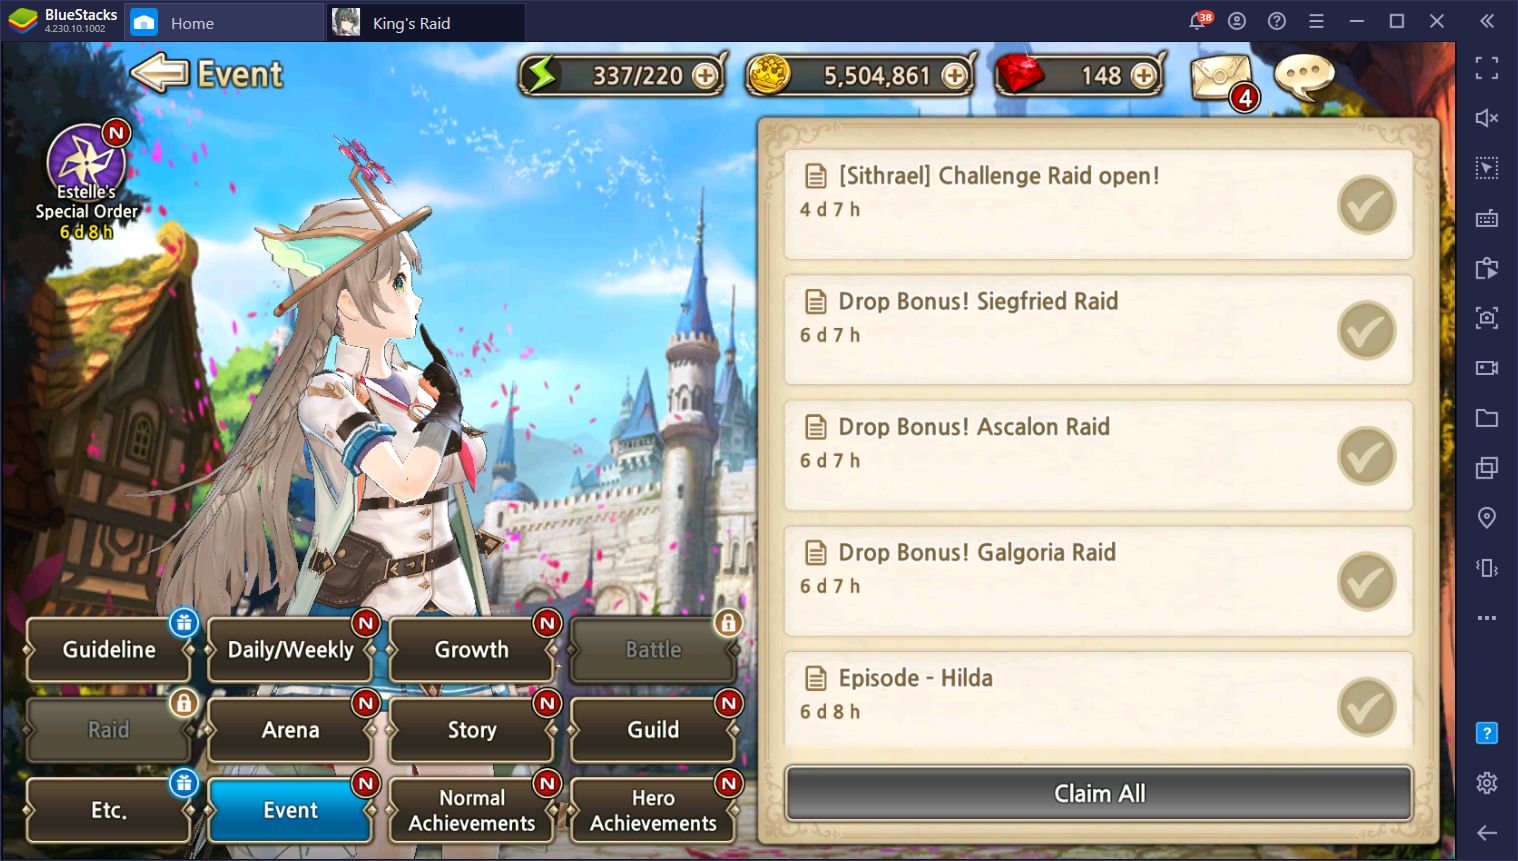 King’s Raid X: Rebellion - Overview on all the Ongoing Events After August’s Massive Update